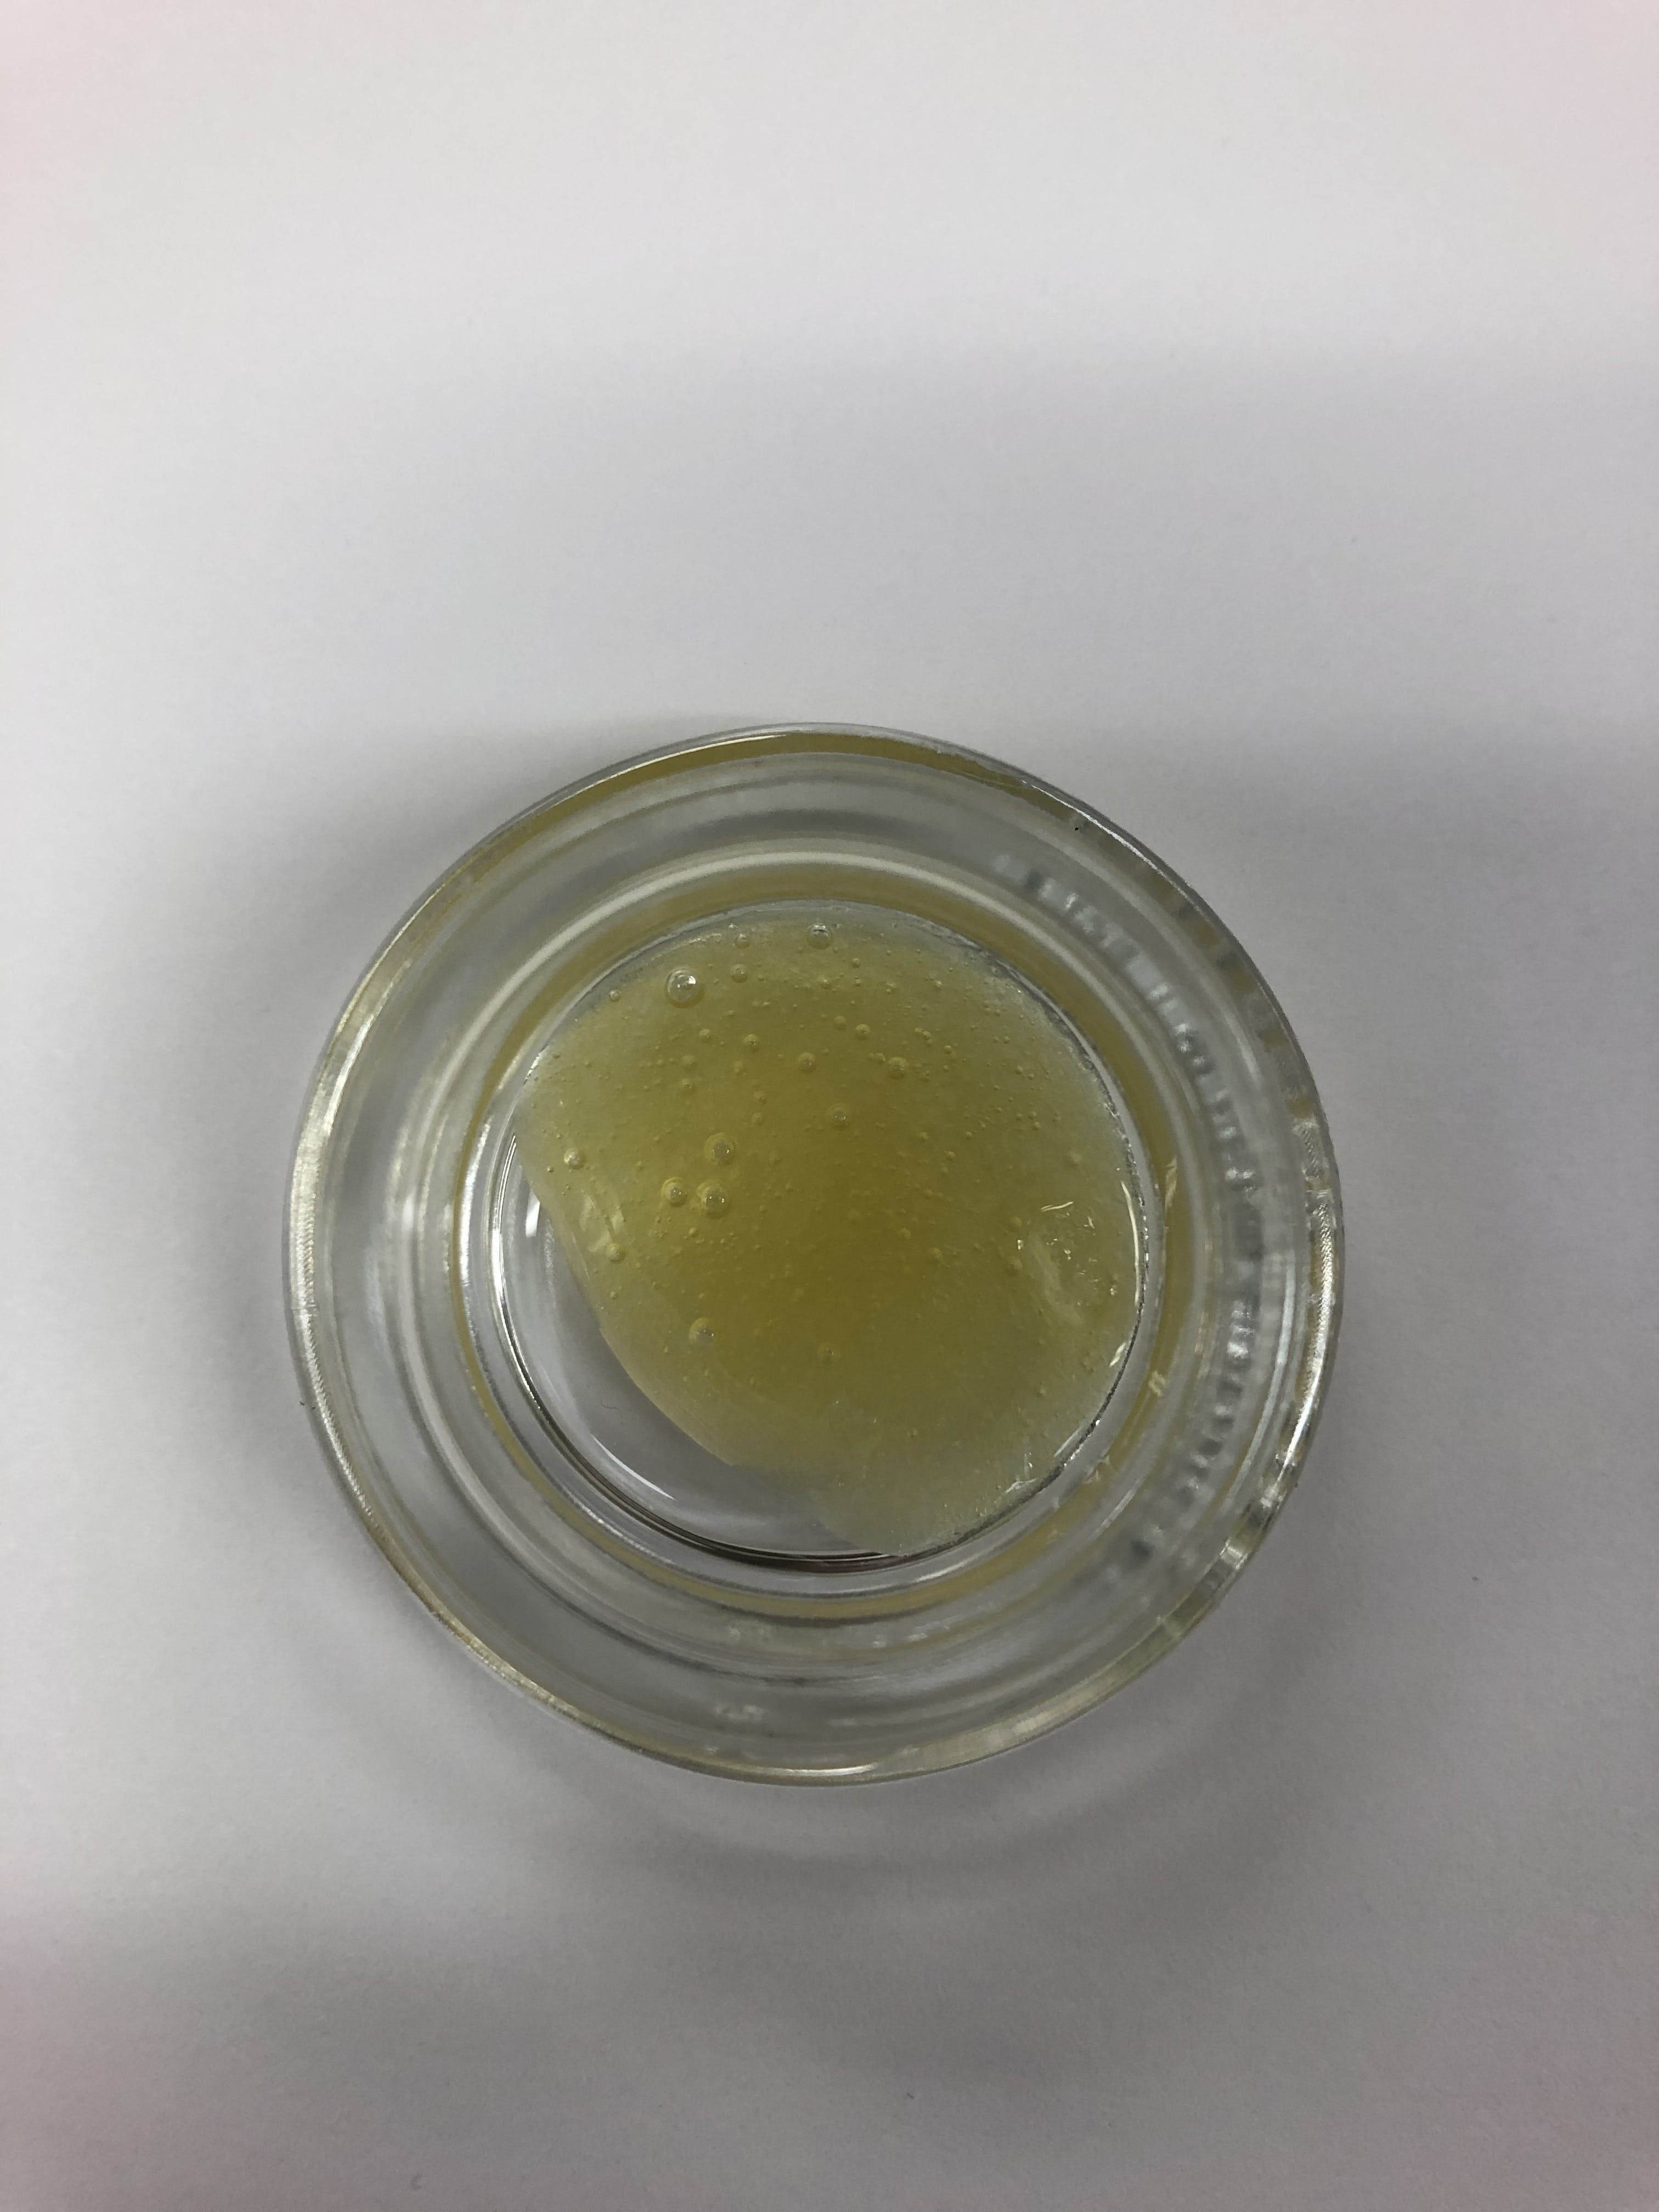 concentrate-chernobyl-sauce